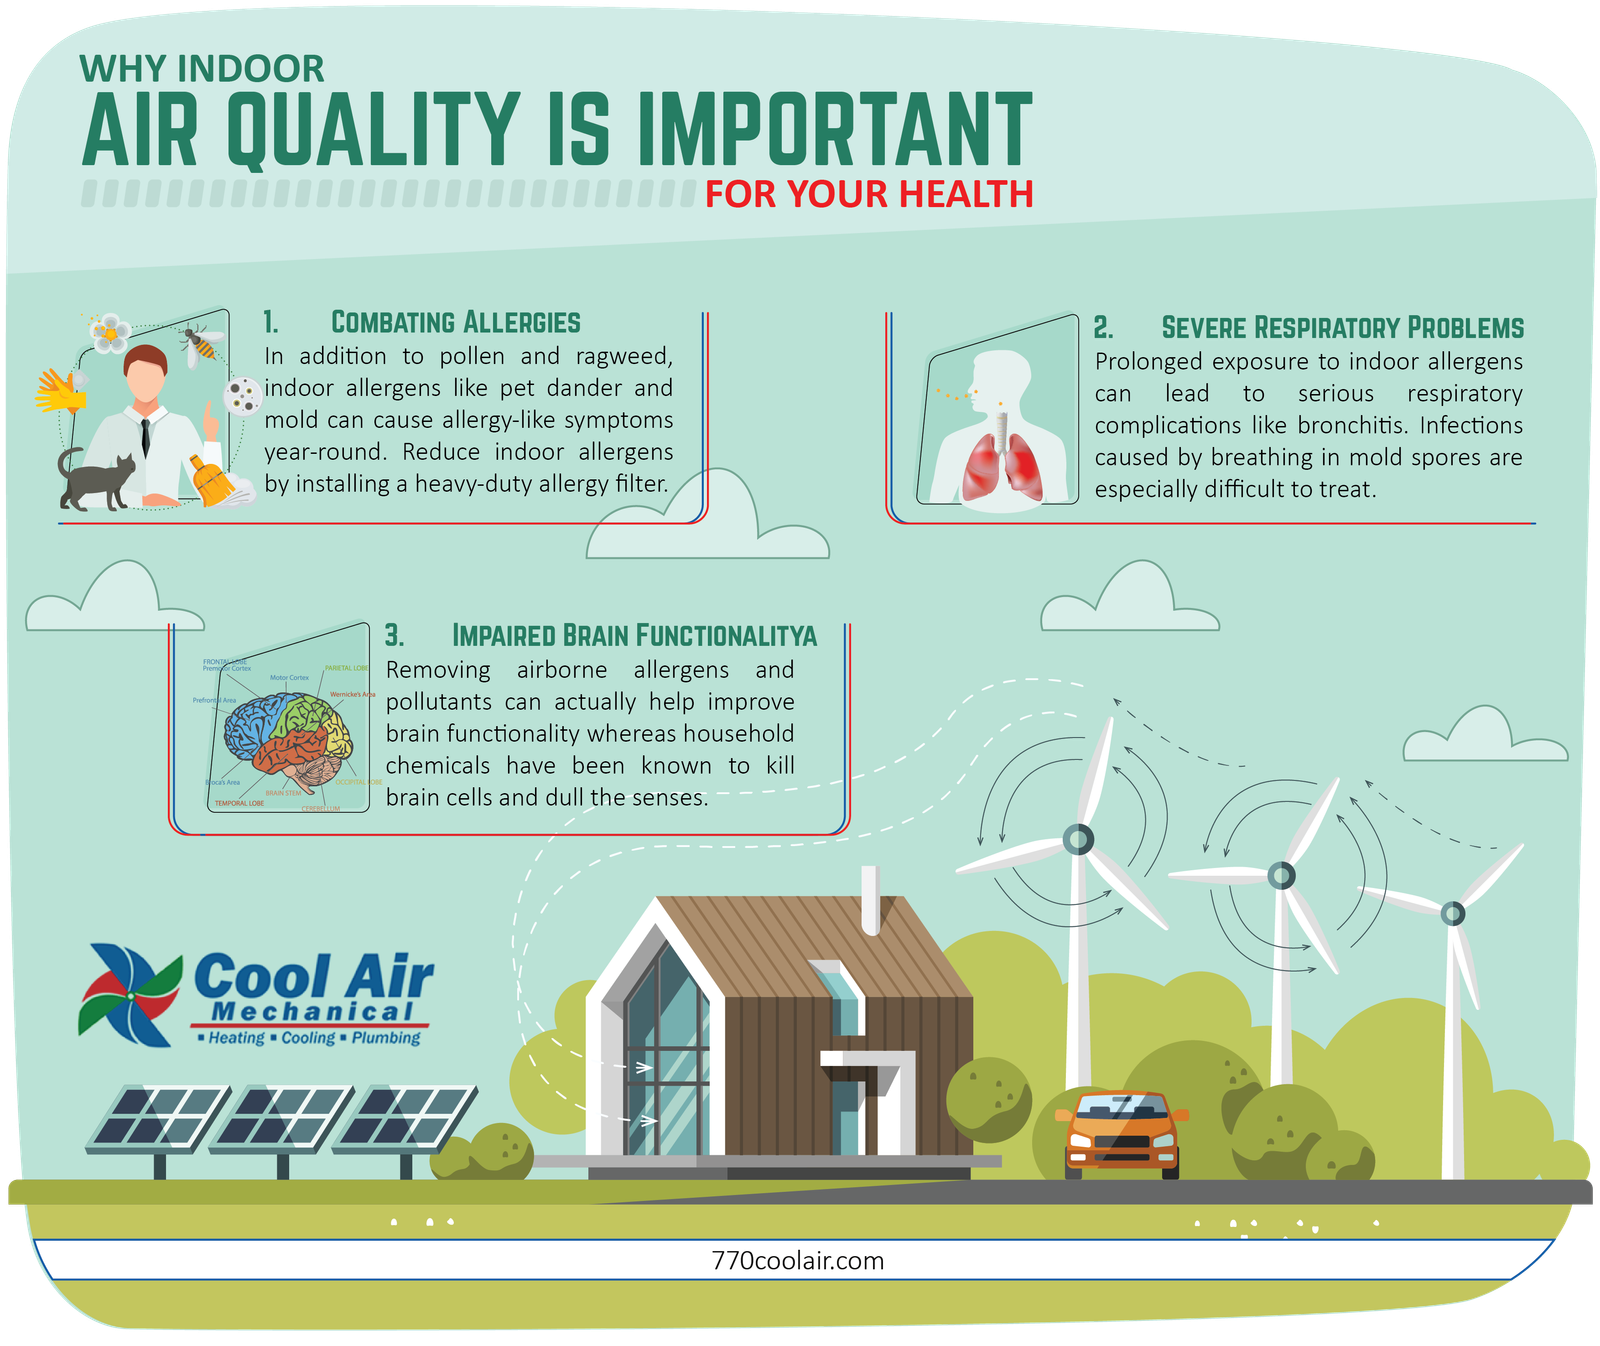 Why Indoor Air Quality is important